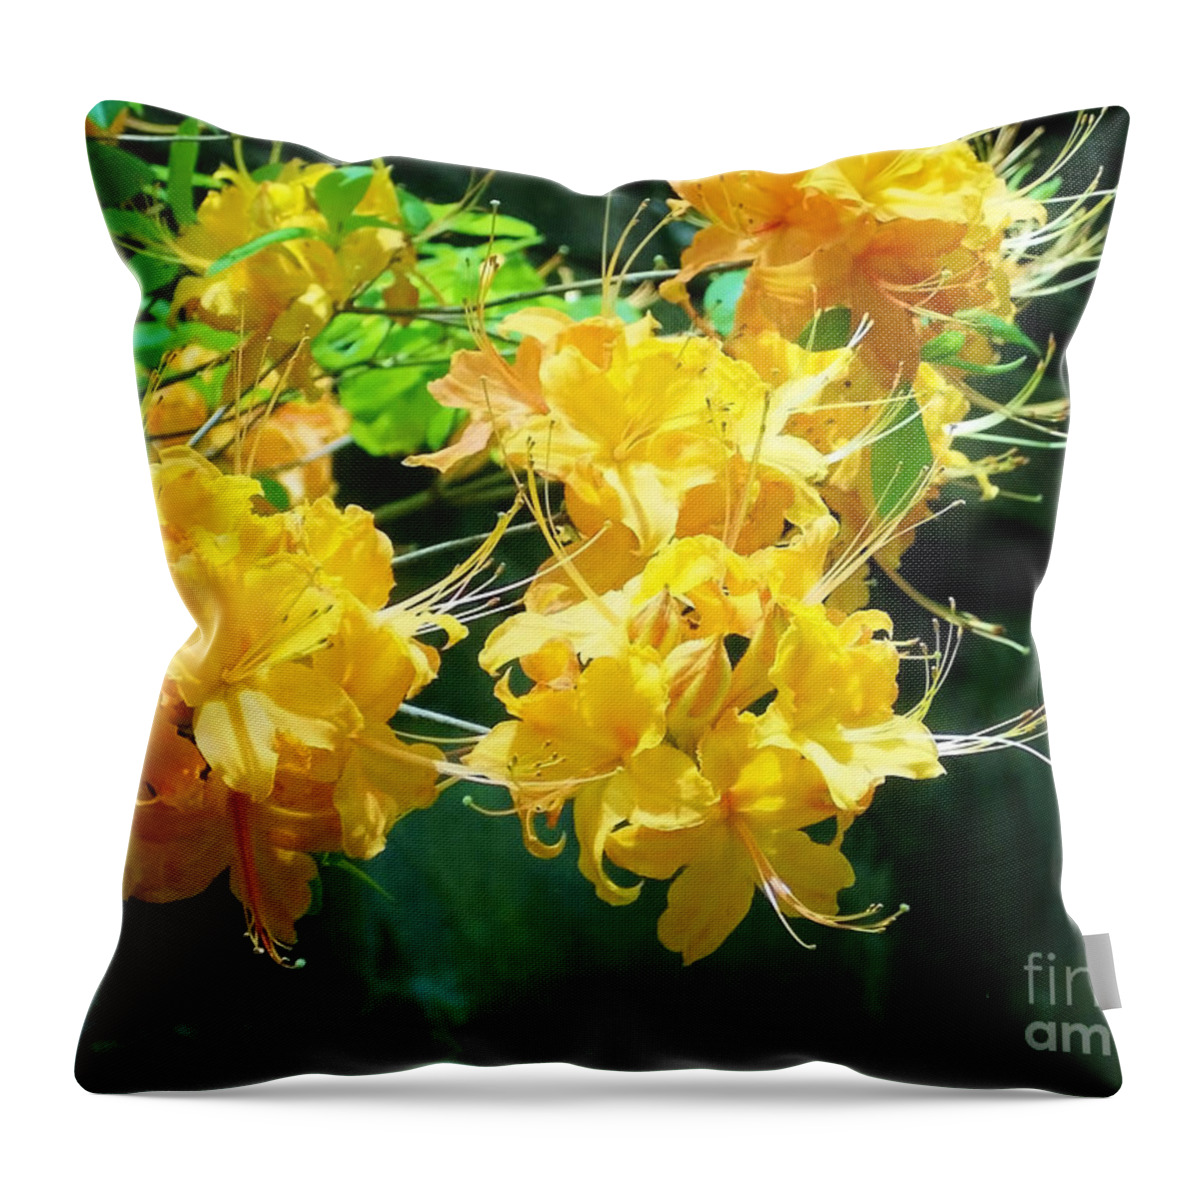 Centered Throw Pillow featuring the photograph Centered Yellow Floral by Roberta Byram